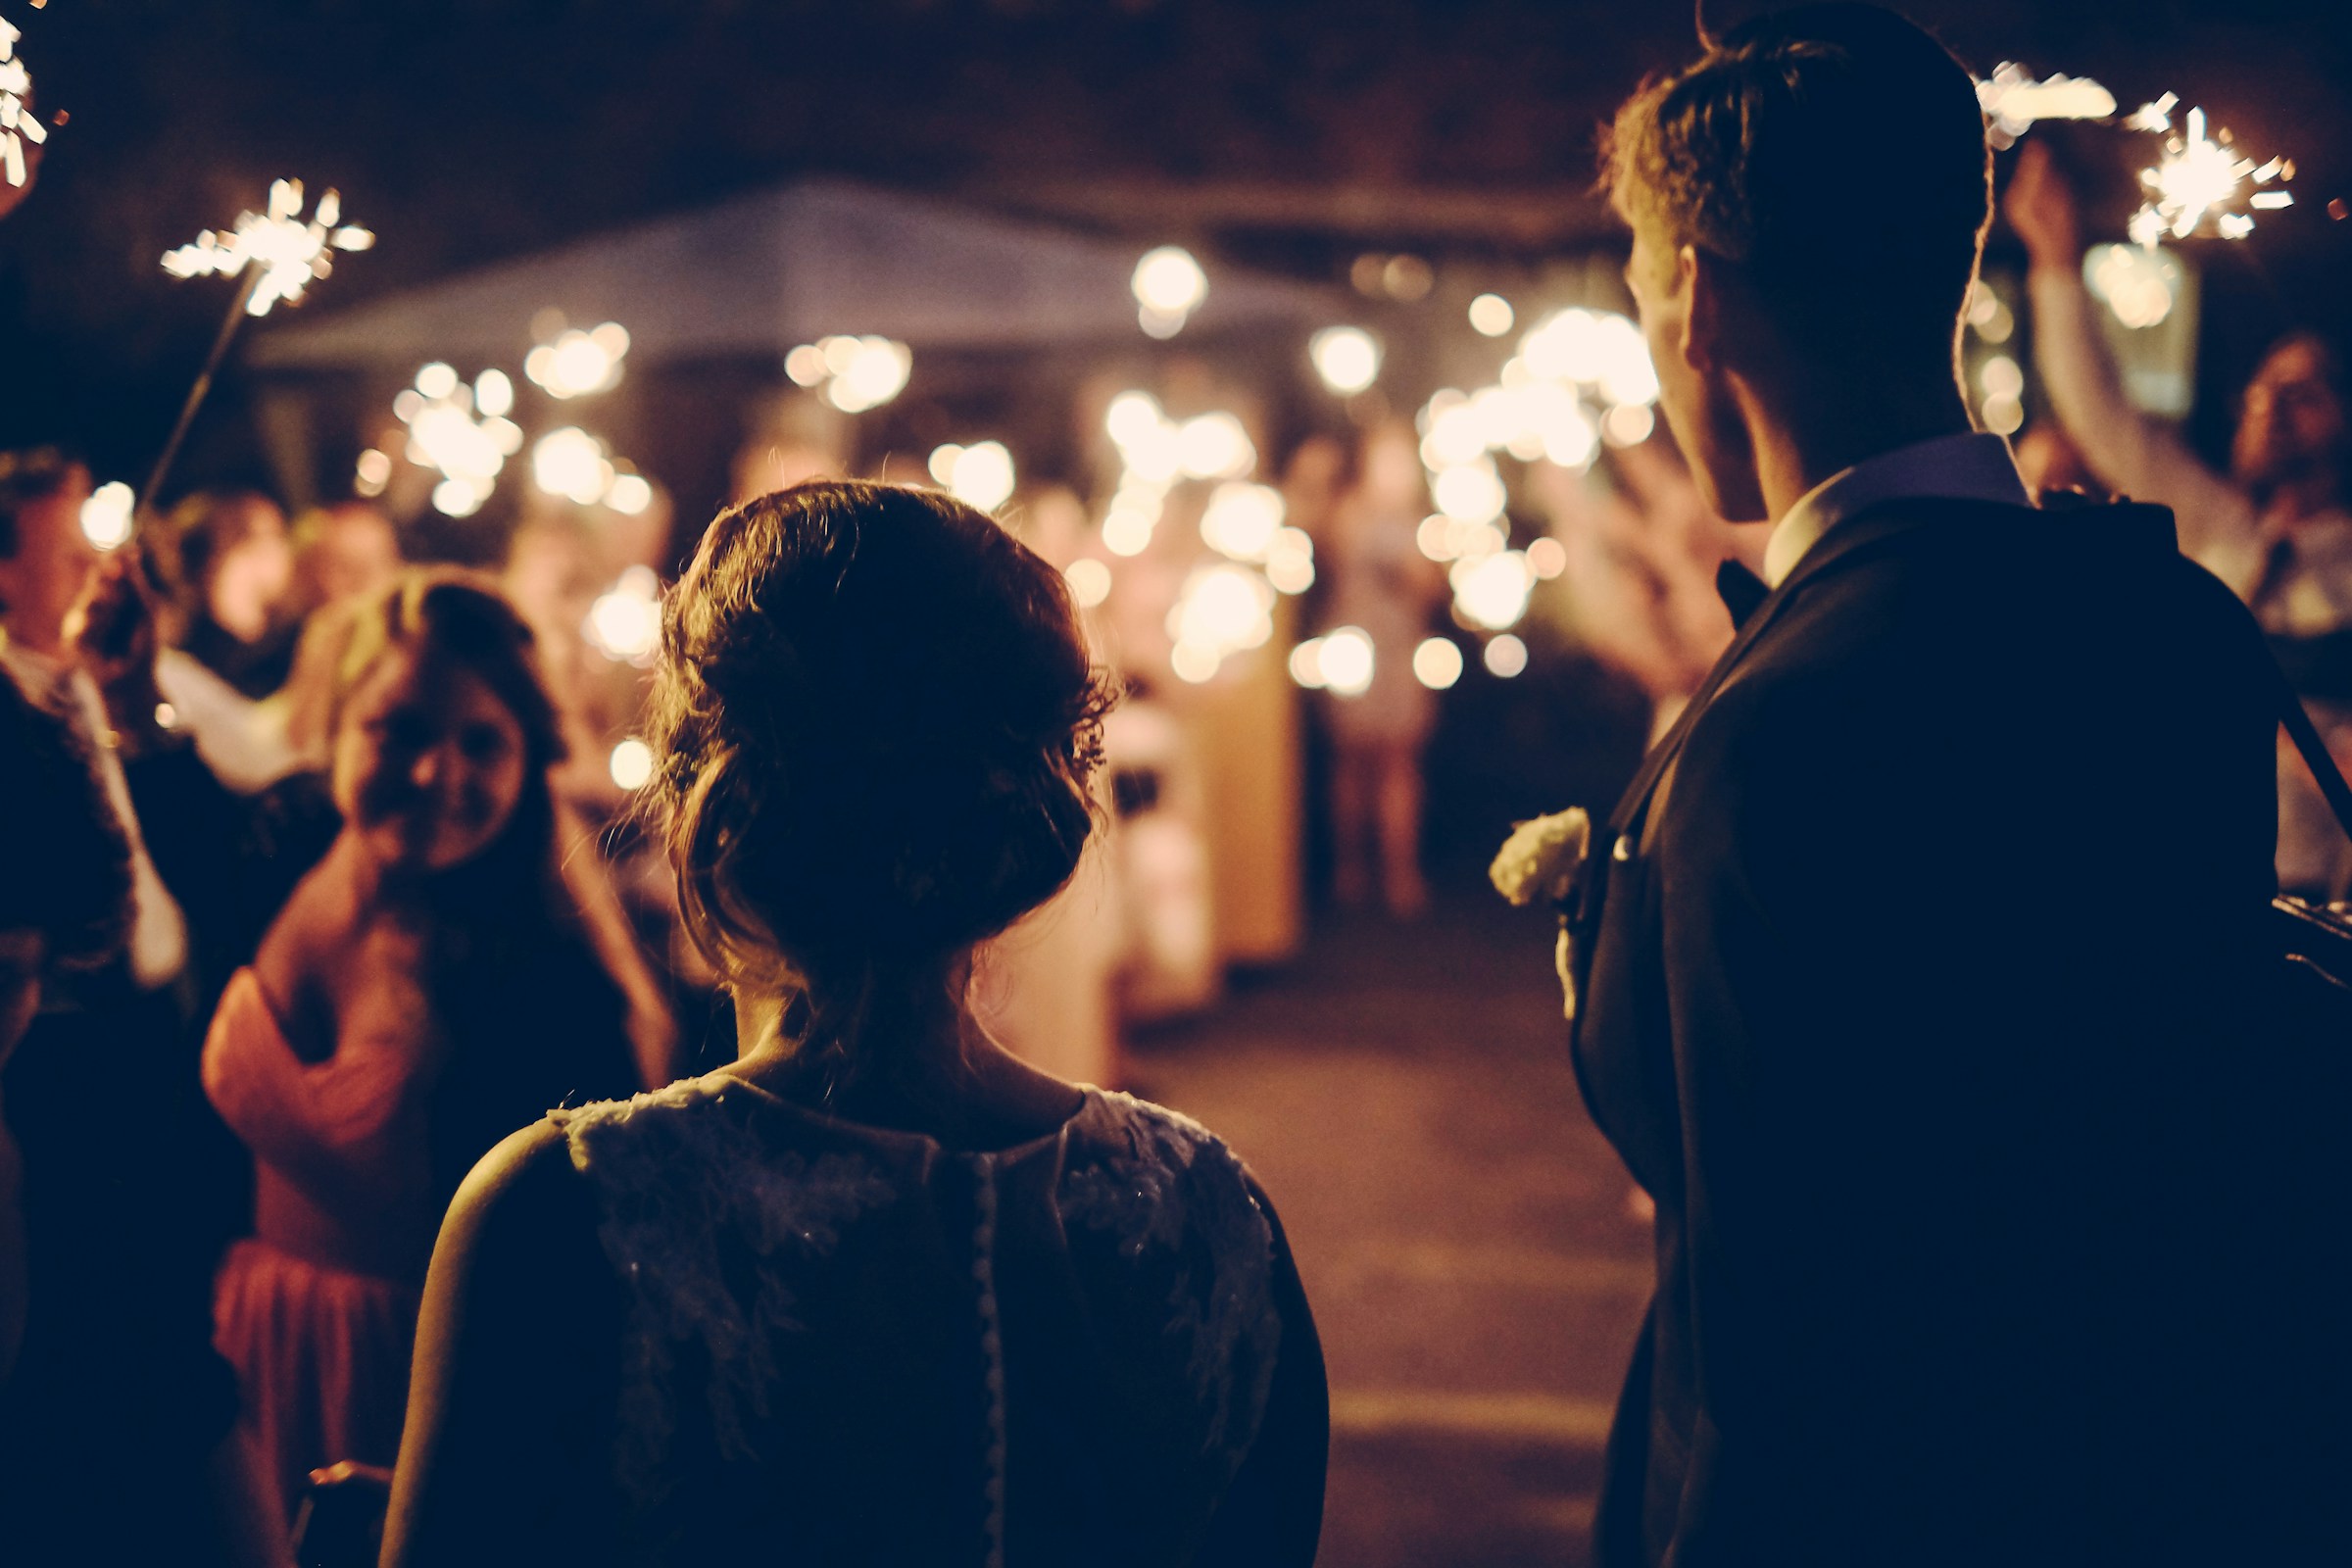 Couple with their wedding guests | Source: Unsplash